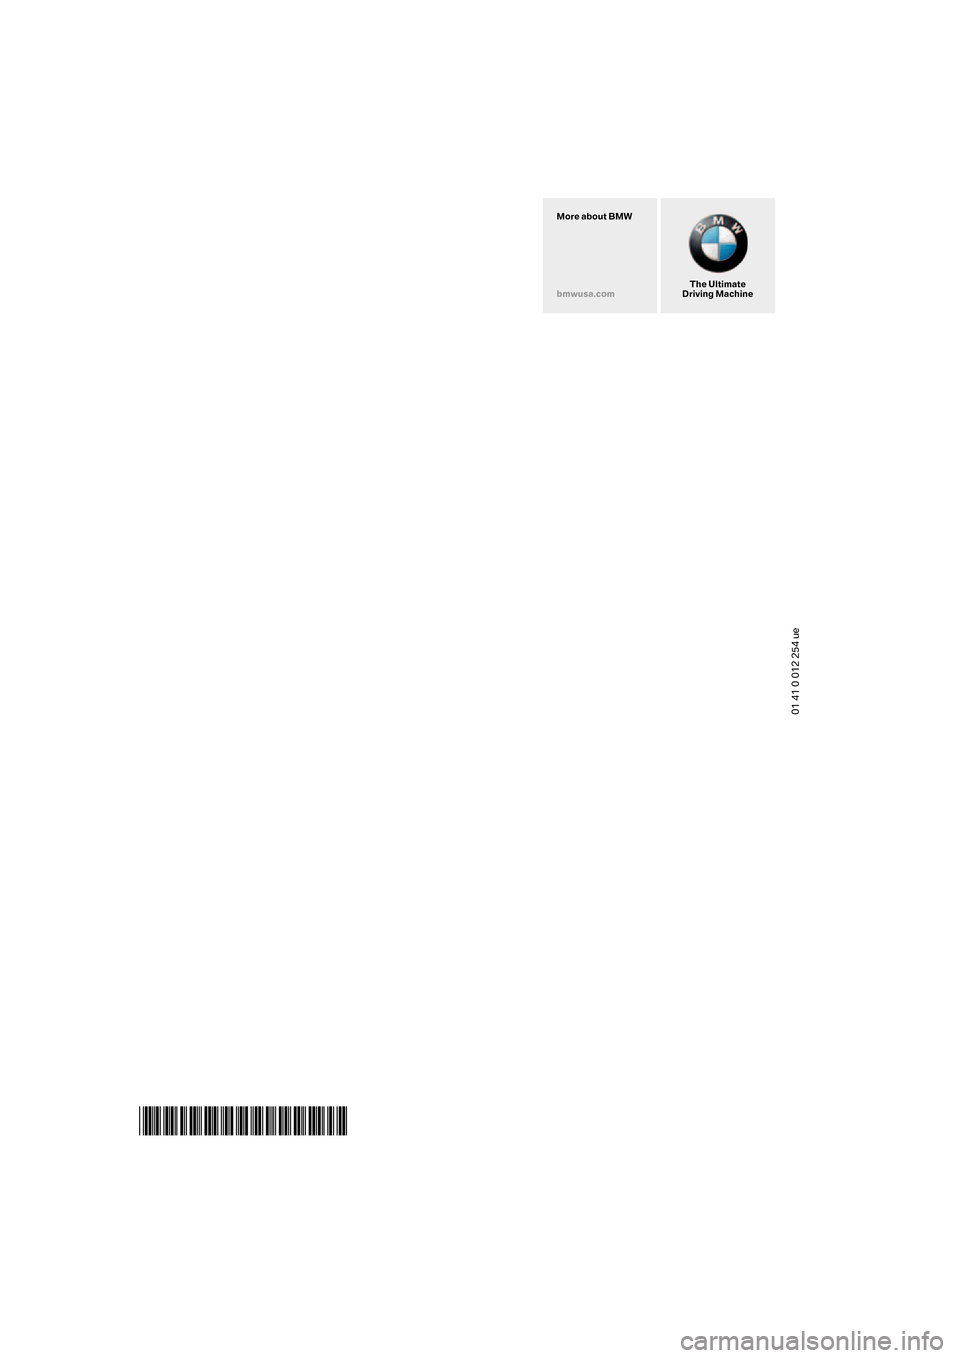 BMW 745Li 2006 E66 Owners Manual 01 41 0 012 254 ue
*BL001225400A*
The Ultimate
Driving Machine More about BMW
bmwusa.com 